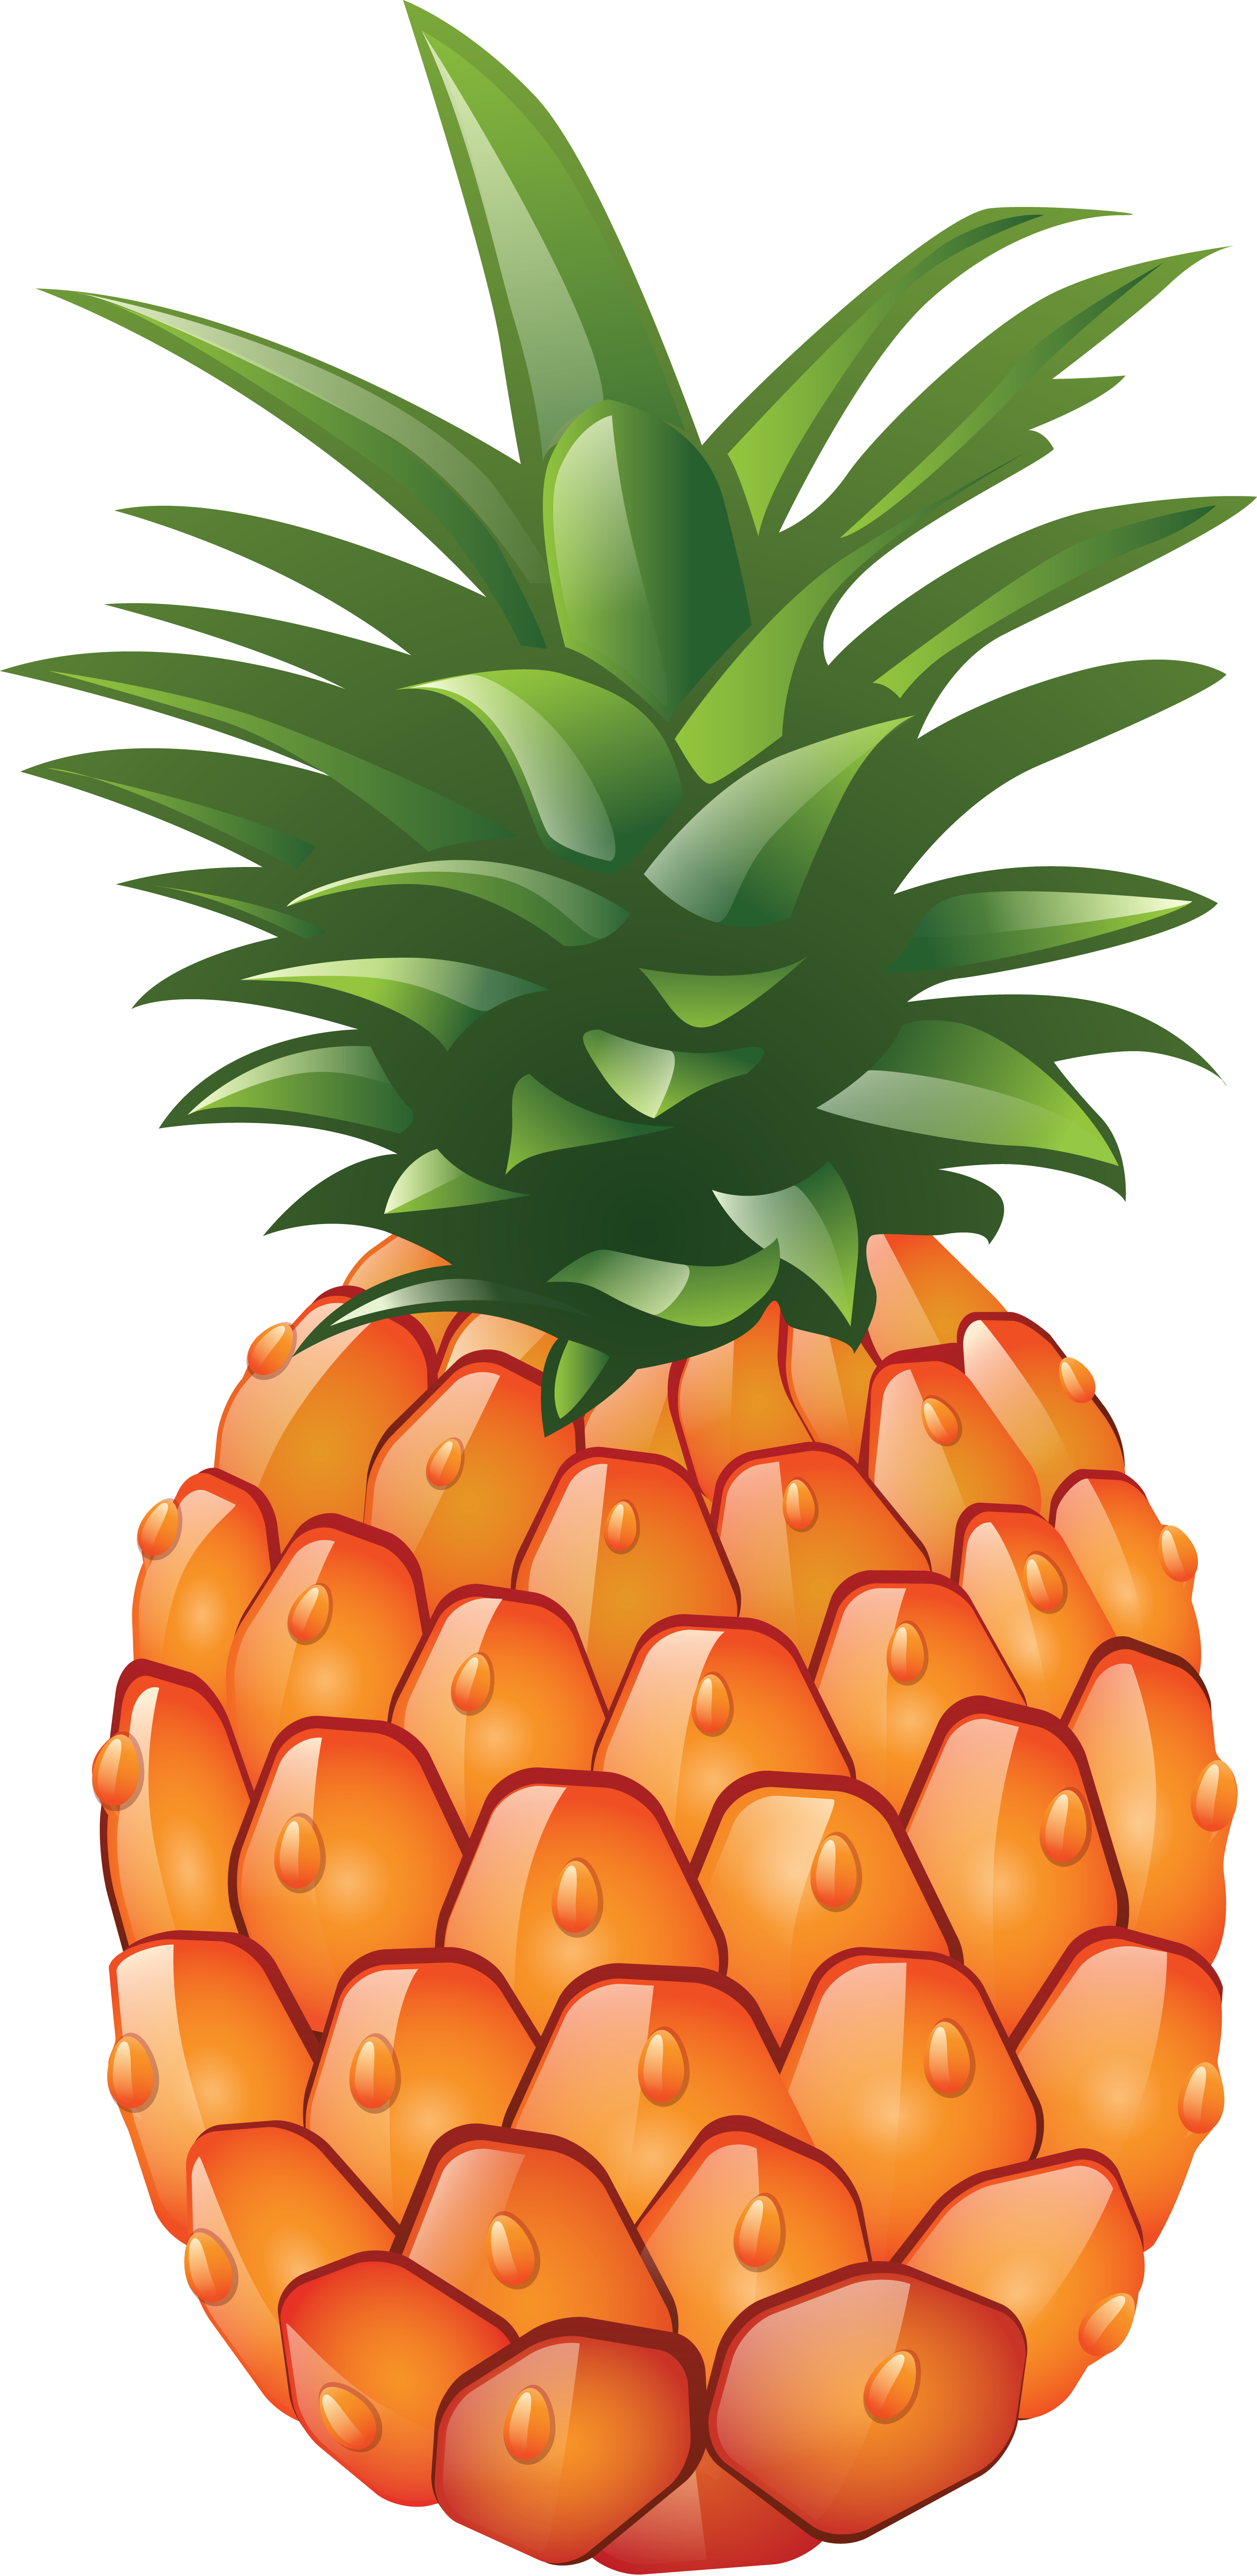 Pineapple png image free. Food clipart party